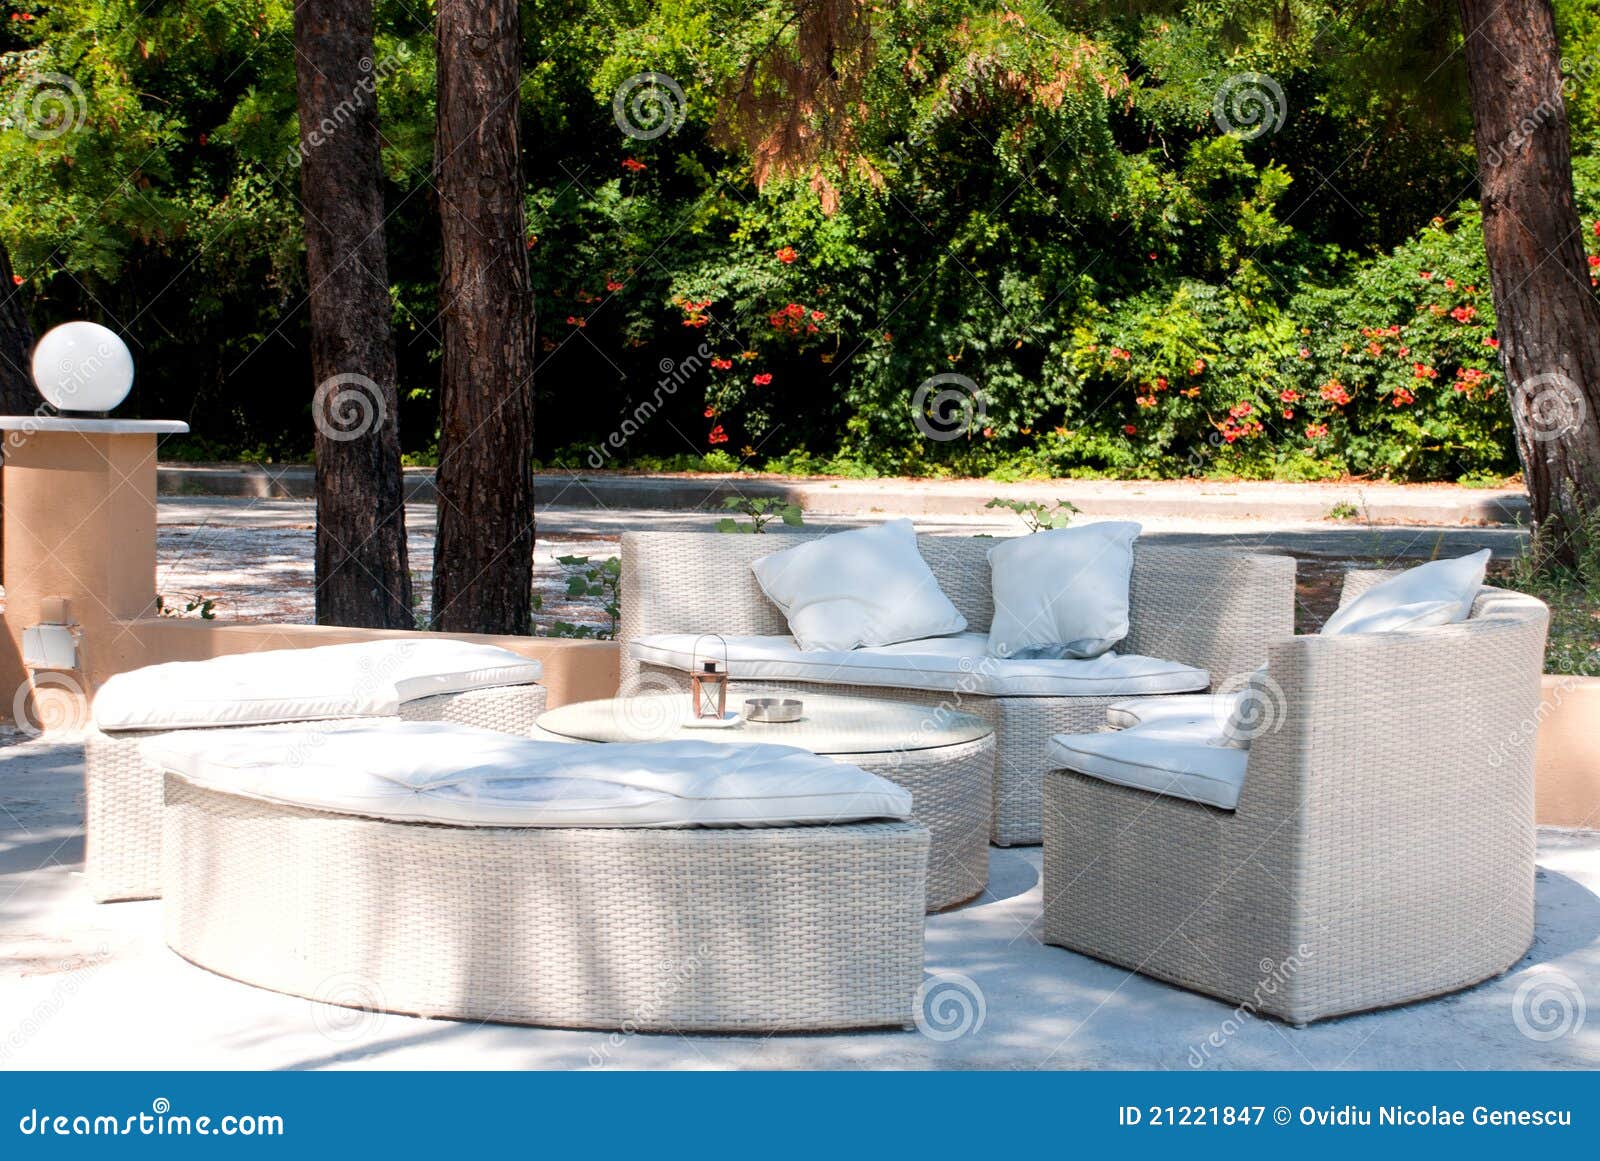 Alfresco Outdoor Dining Stock Image Image Of Blooming 21221847